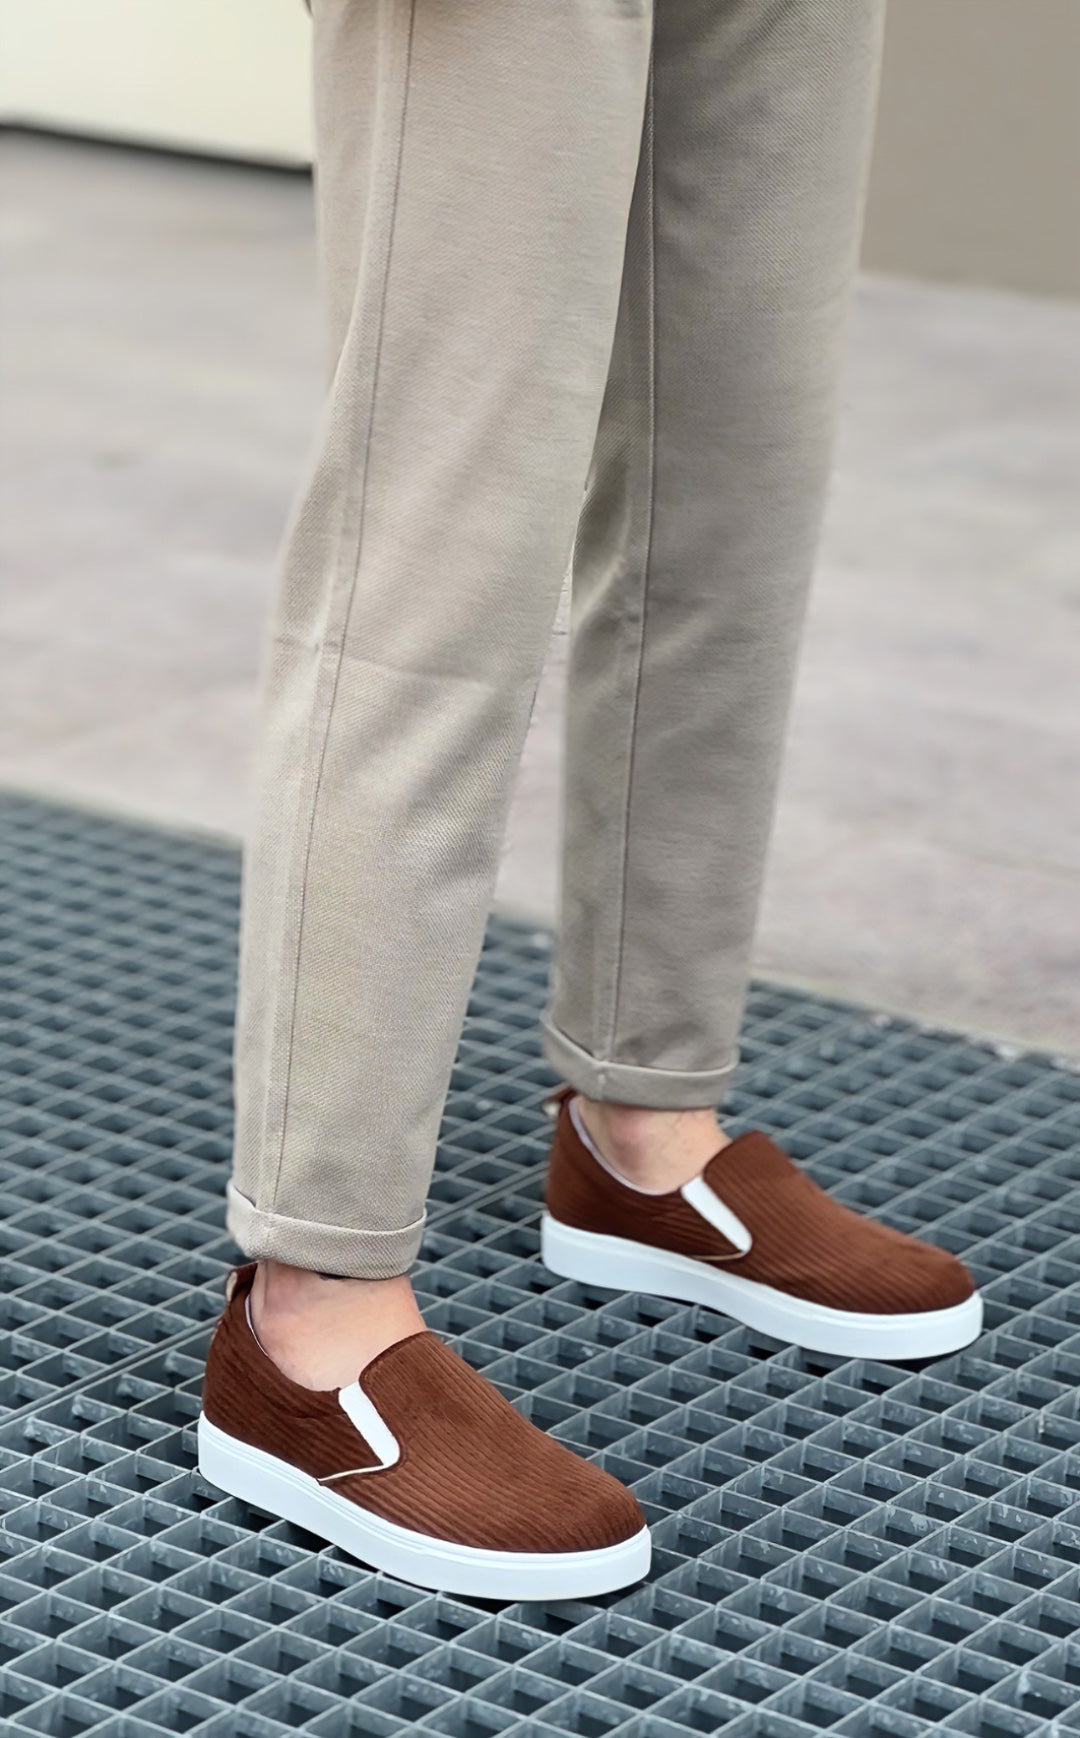 BA0339 Laceless Velvet Brown White Sole Casual Men's Shoes - STREETMODE™